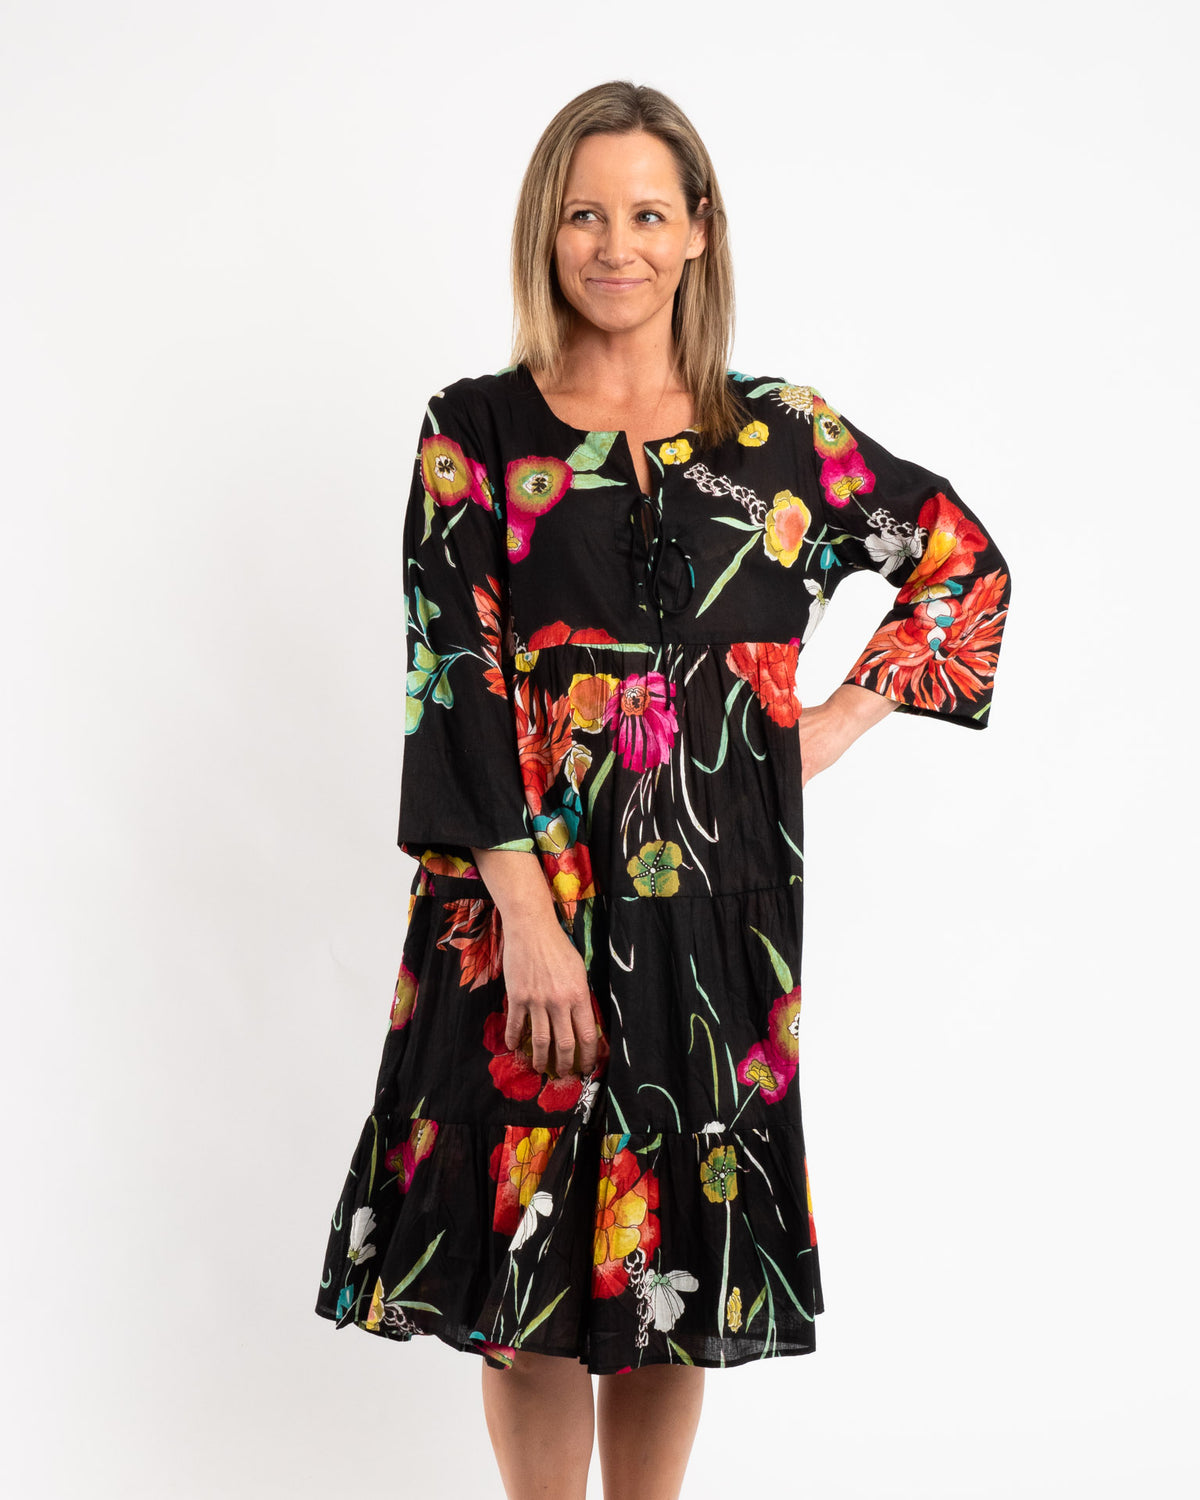 Gypsy Style Panel Dress in Black Floral